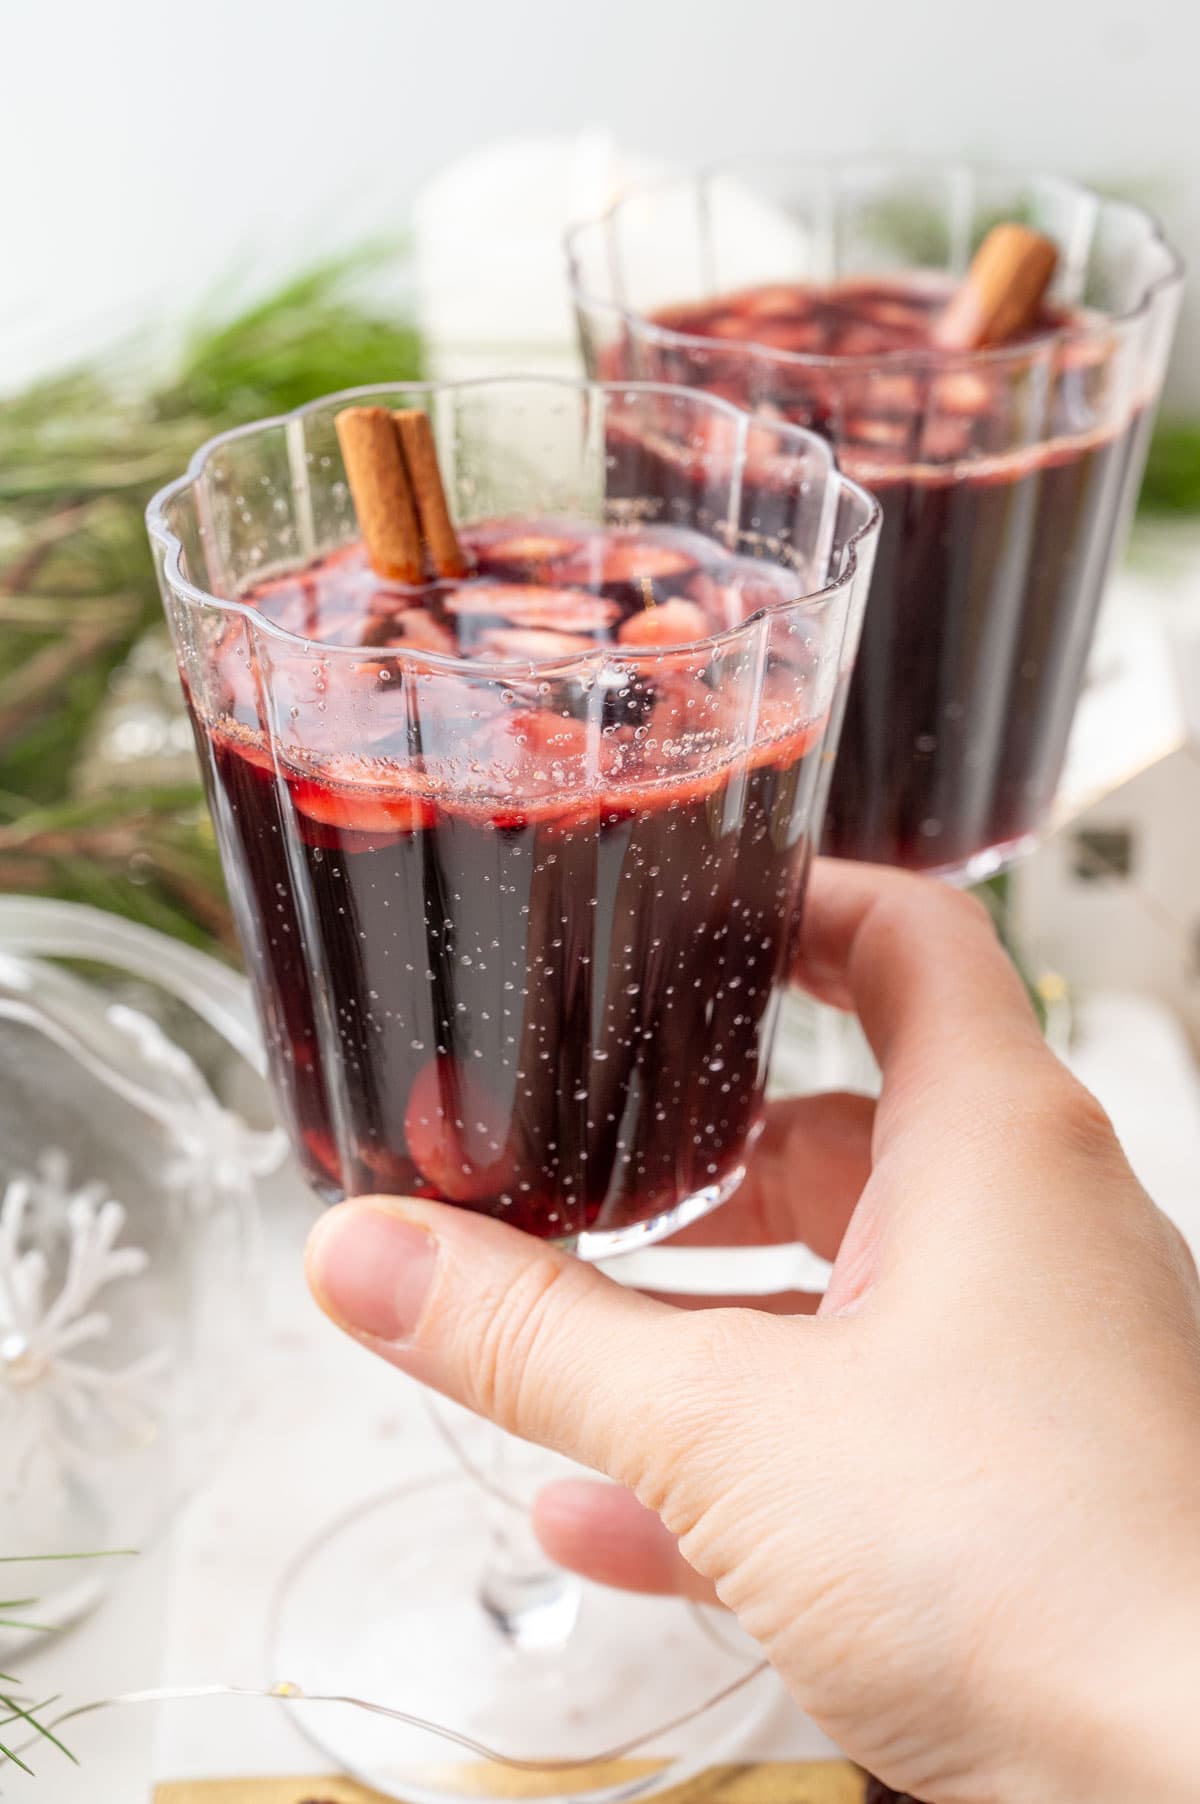 A glass with Glogg is being held in a hand. Christmas decorations in the background.